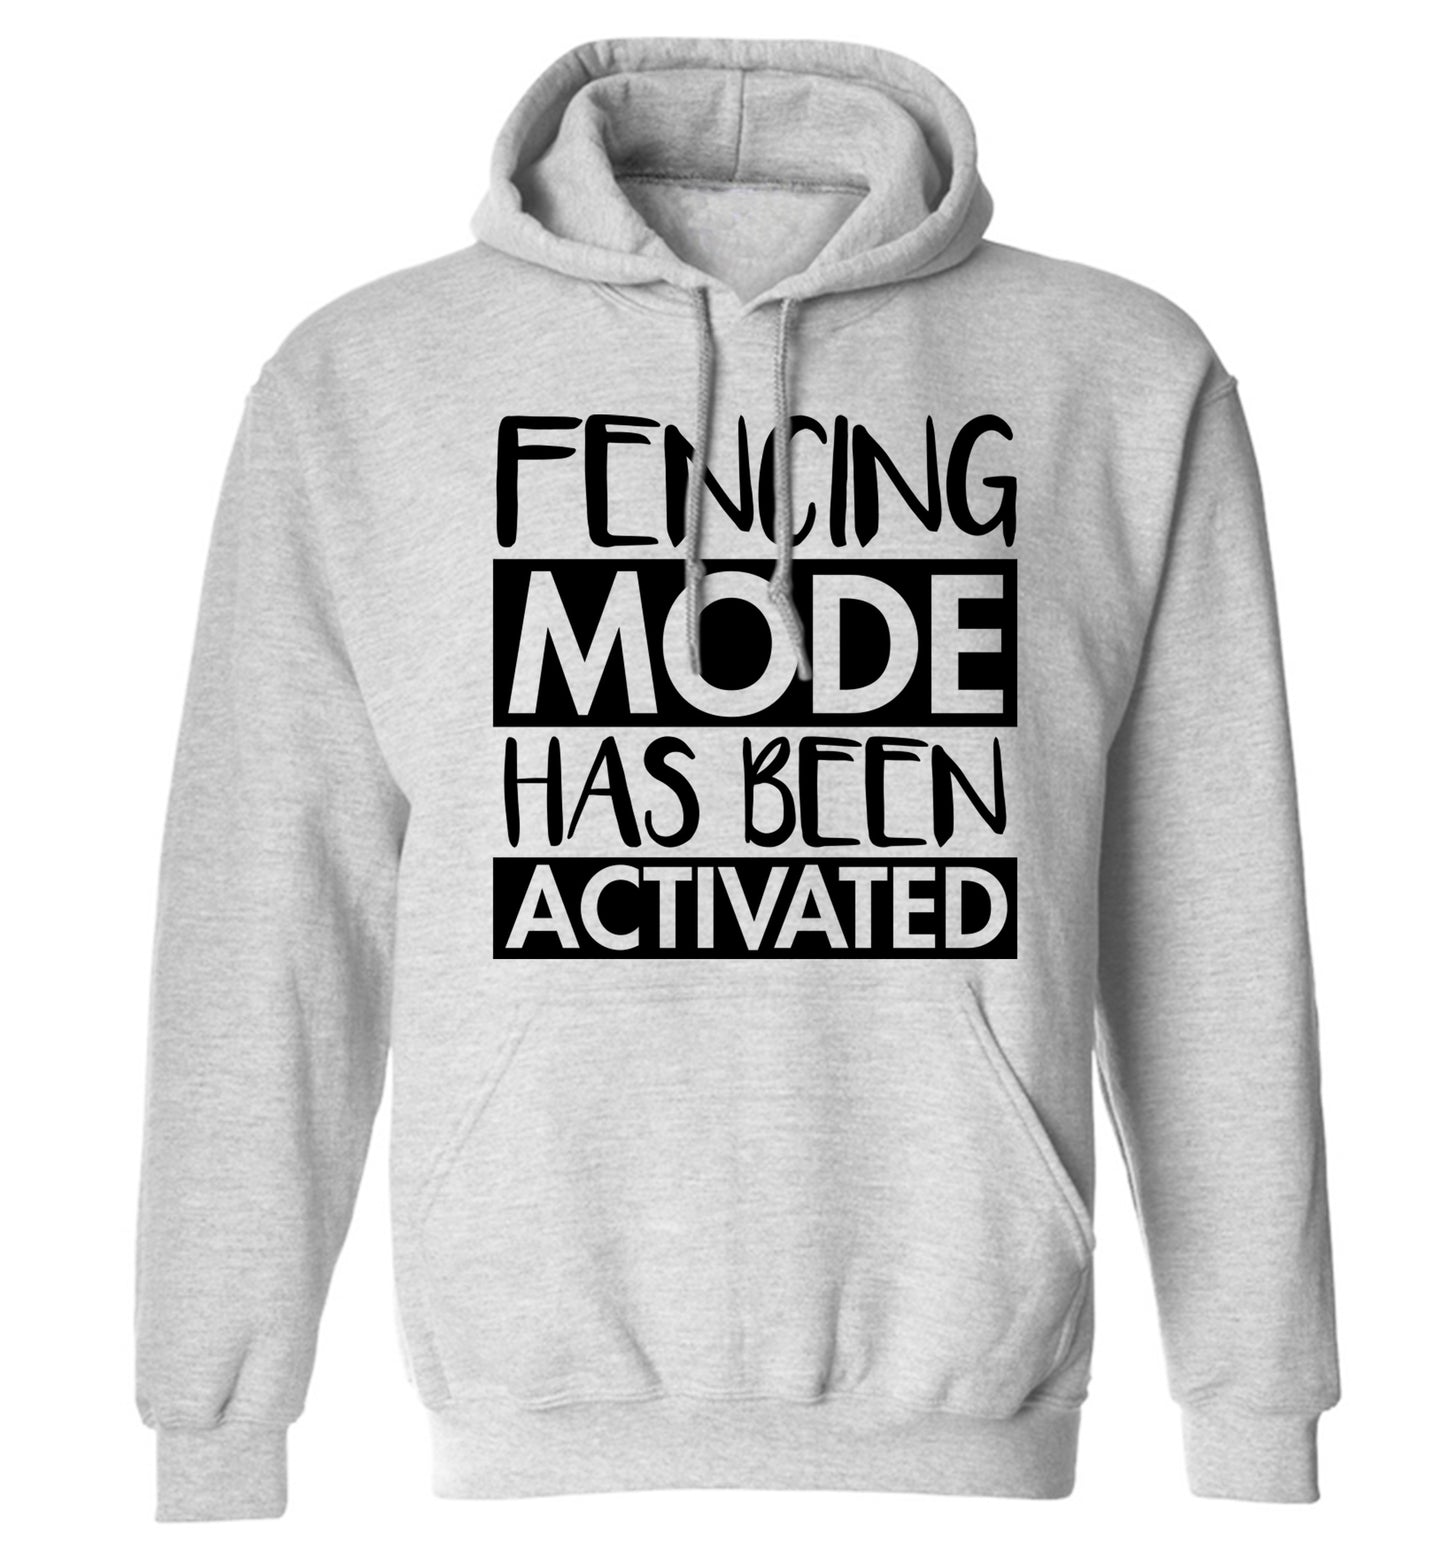 Fencing mode activated adults unisex grey hoodie 2XL